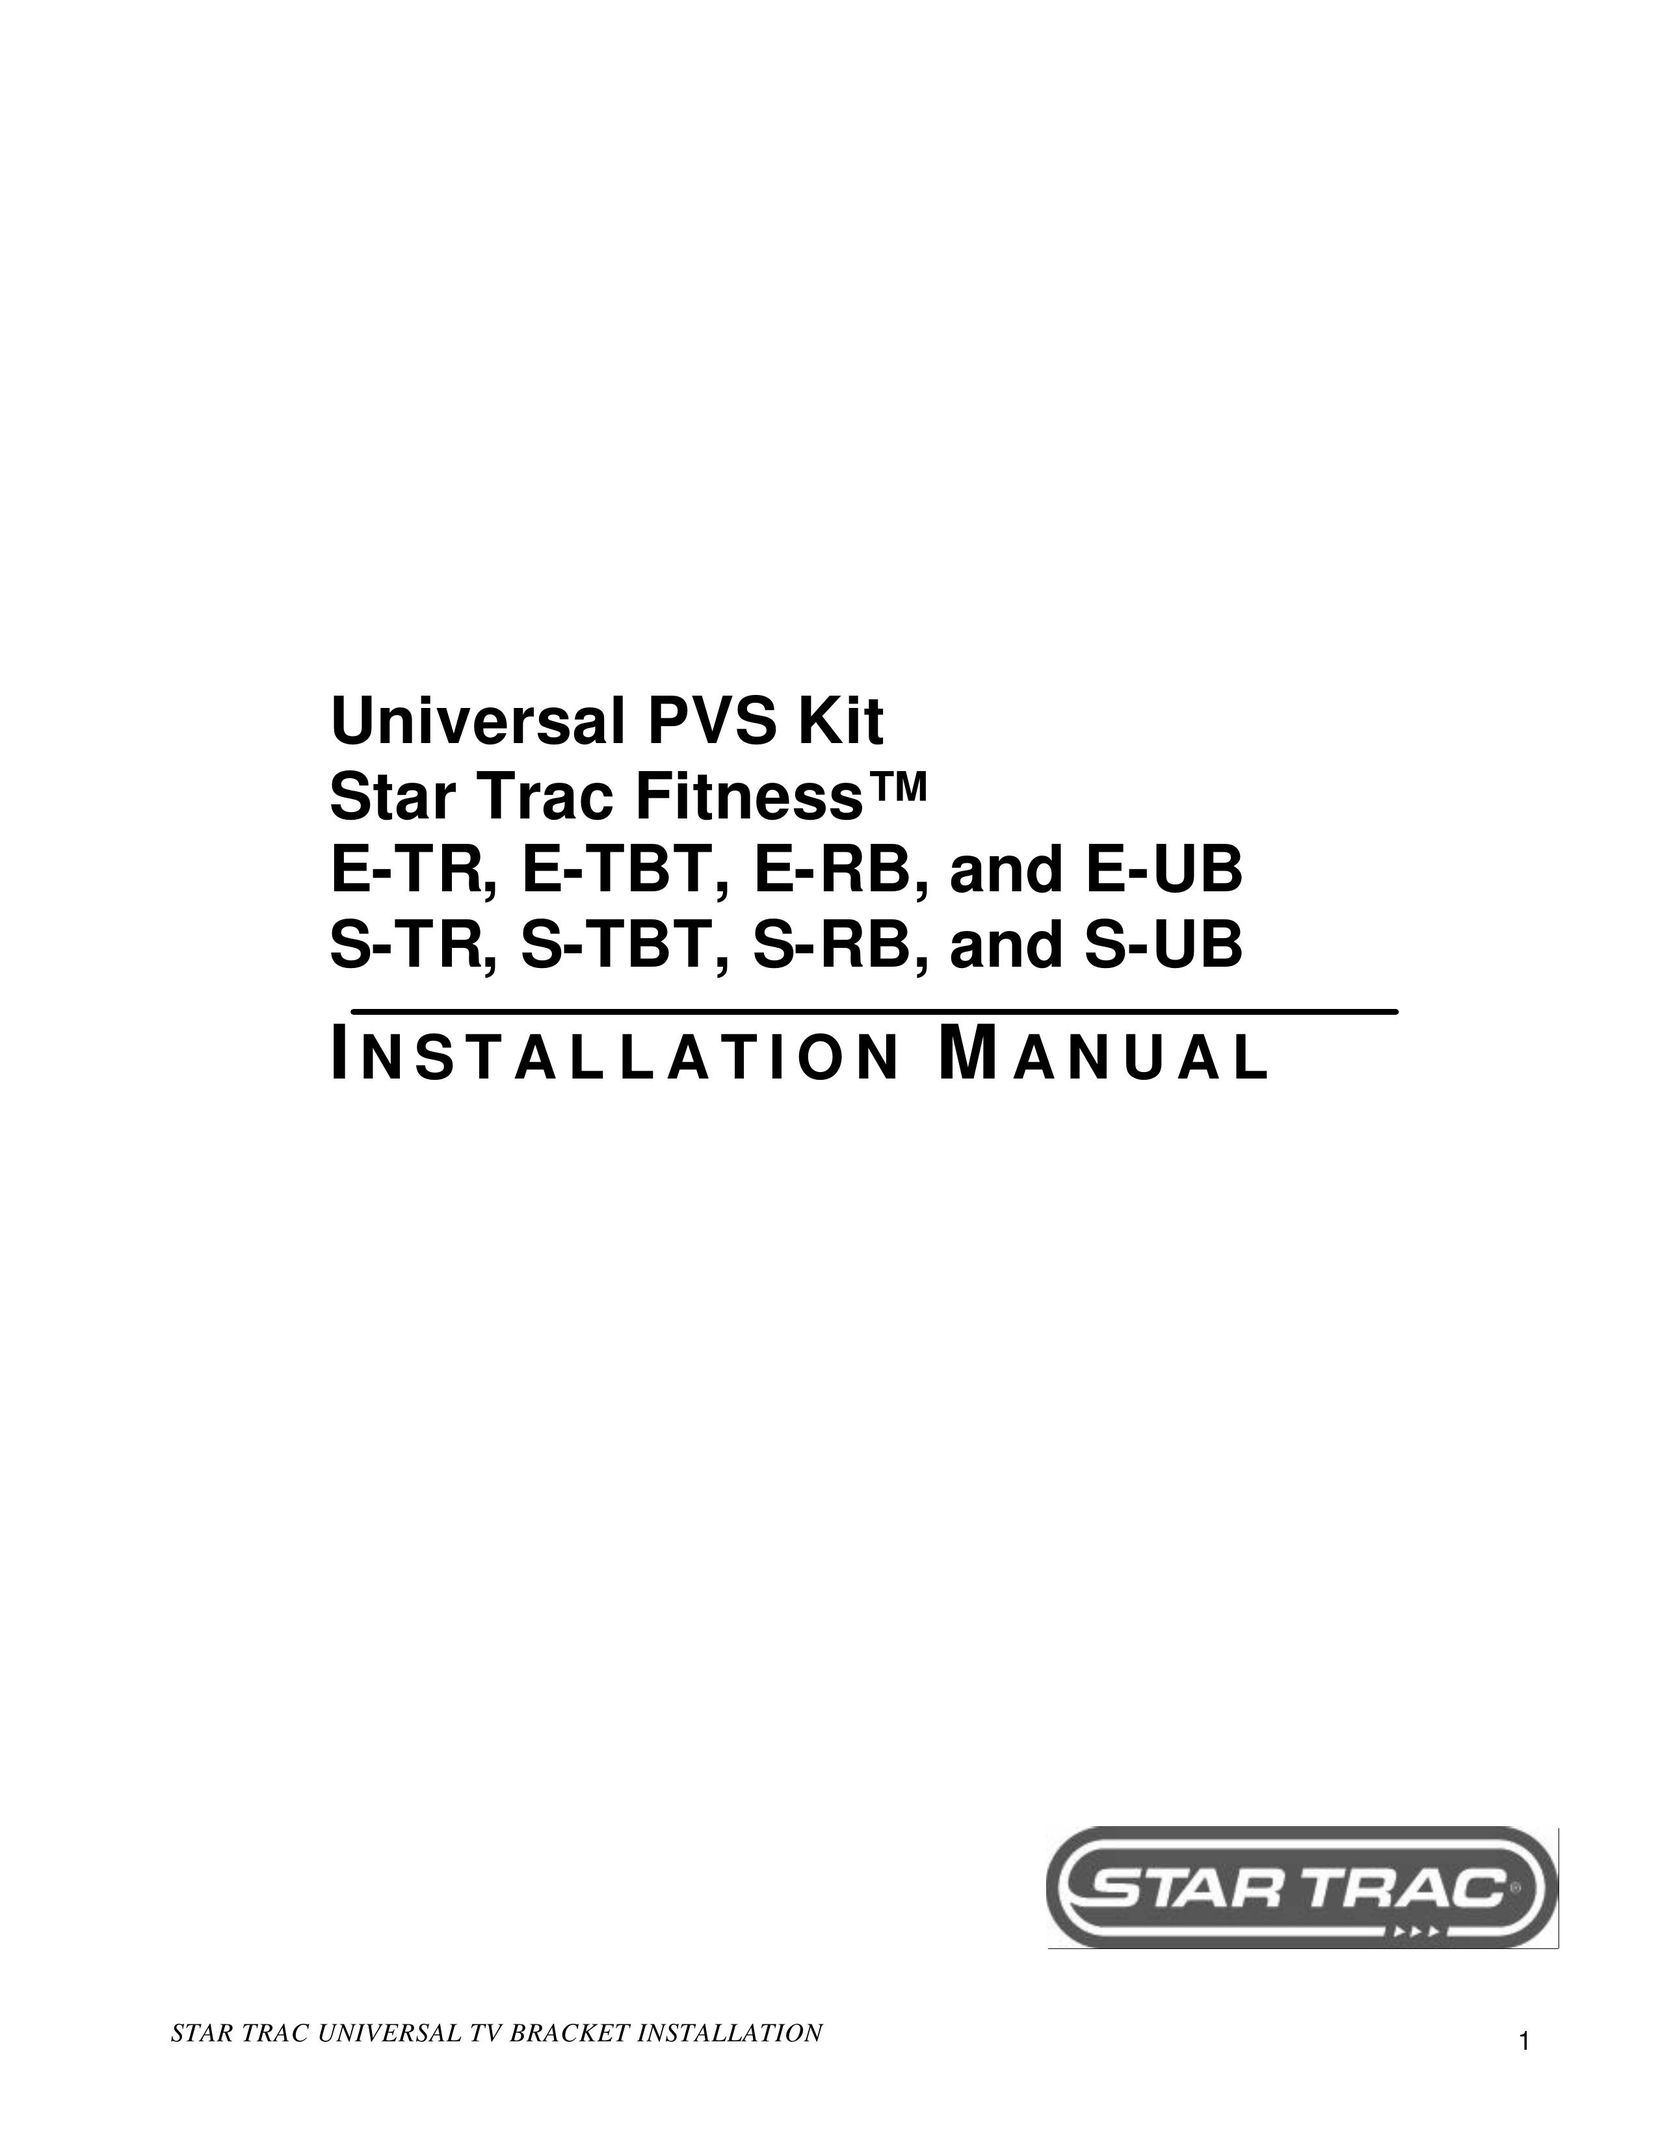 Star Trac S-RB Fitness Electronics User Manual